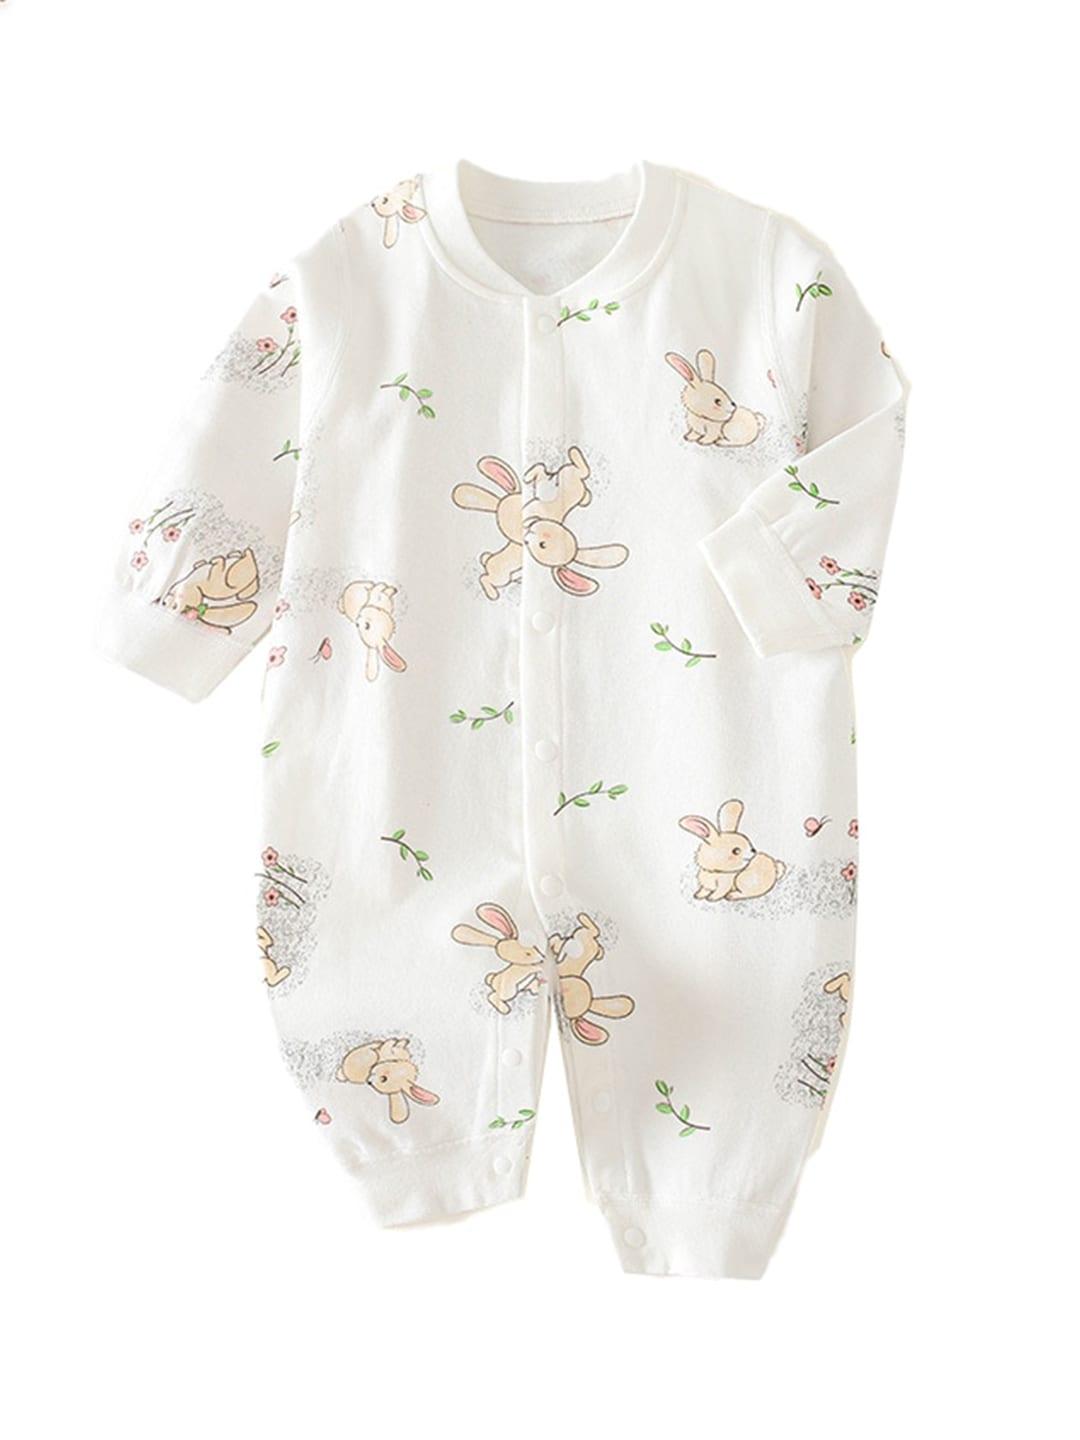 StyleCast Infants Printed Cotton Rompers